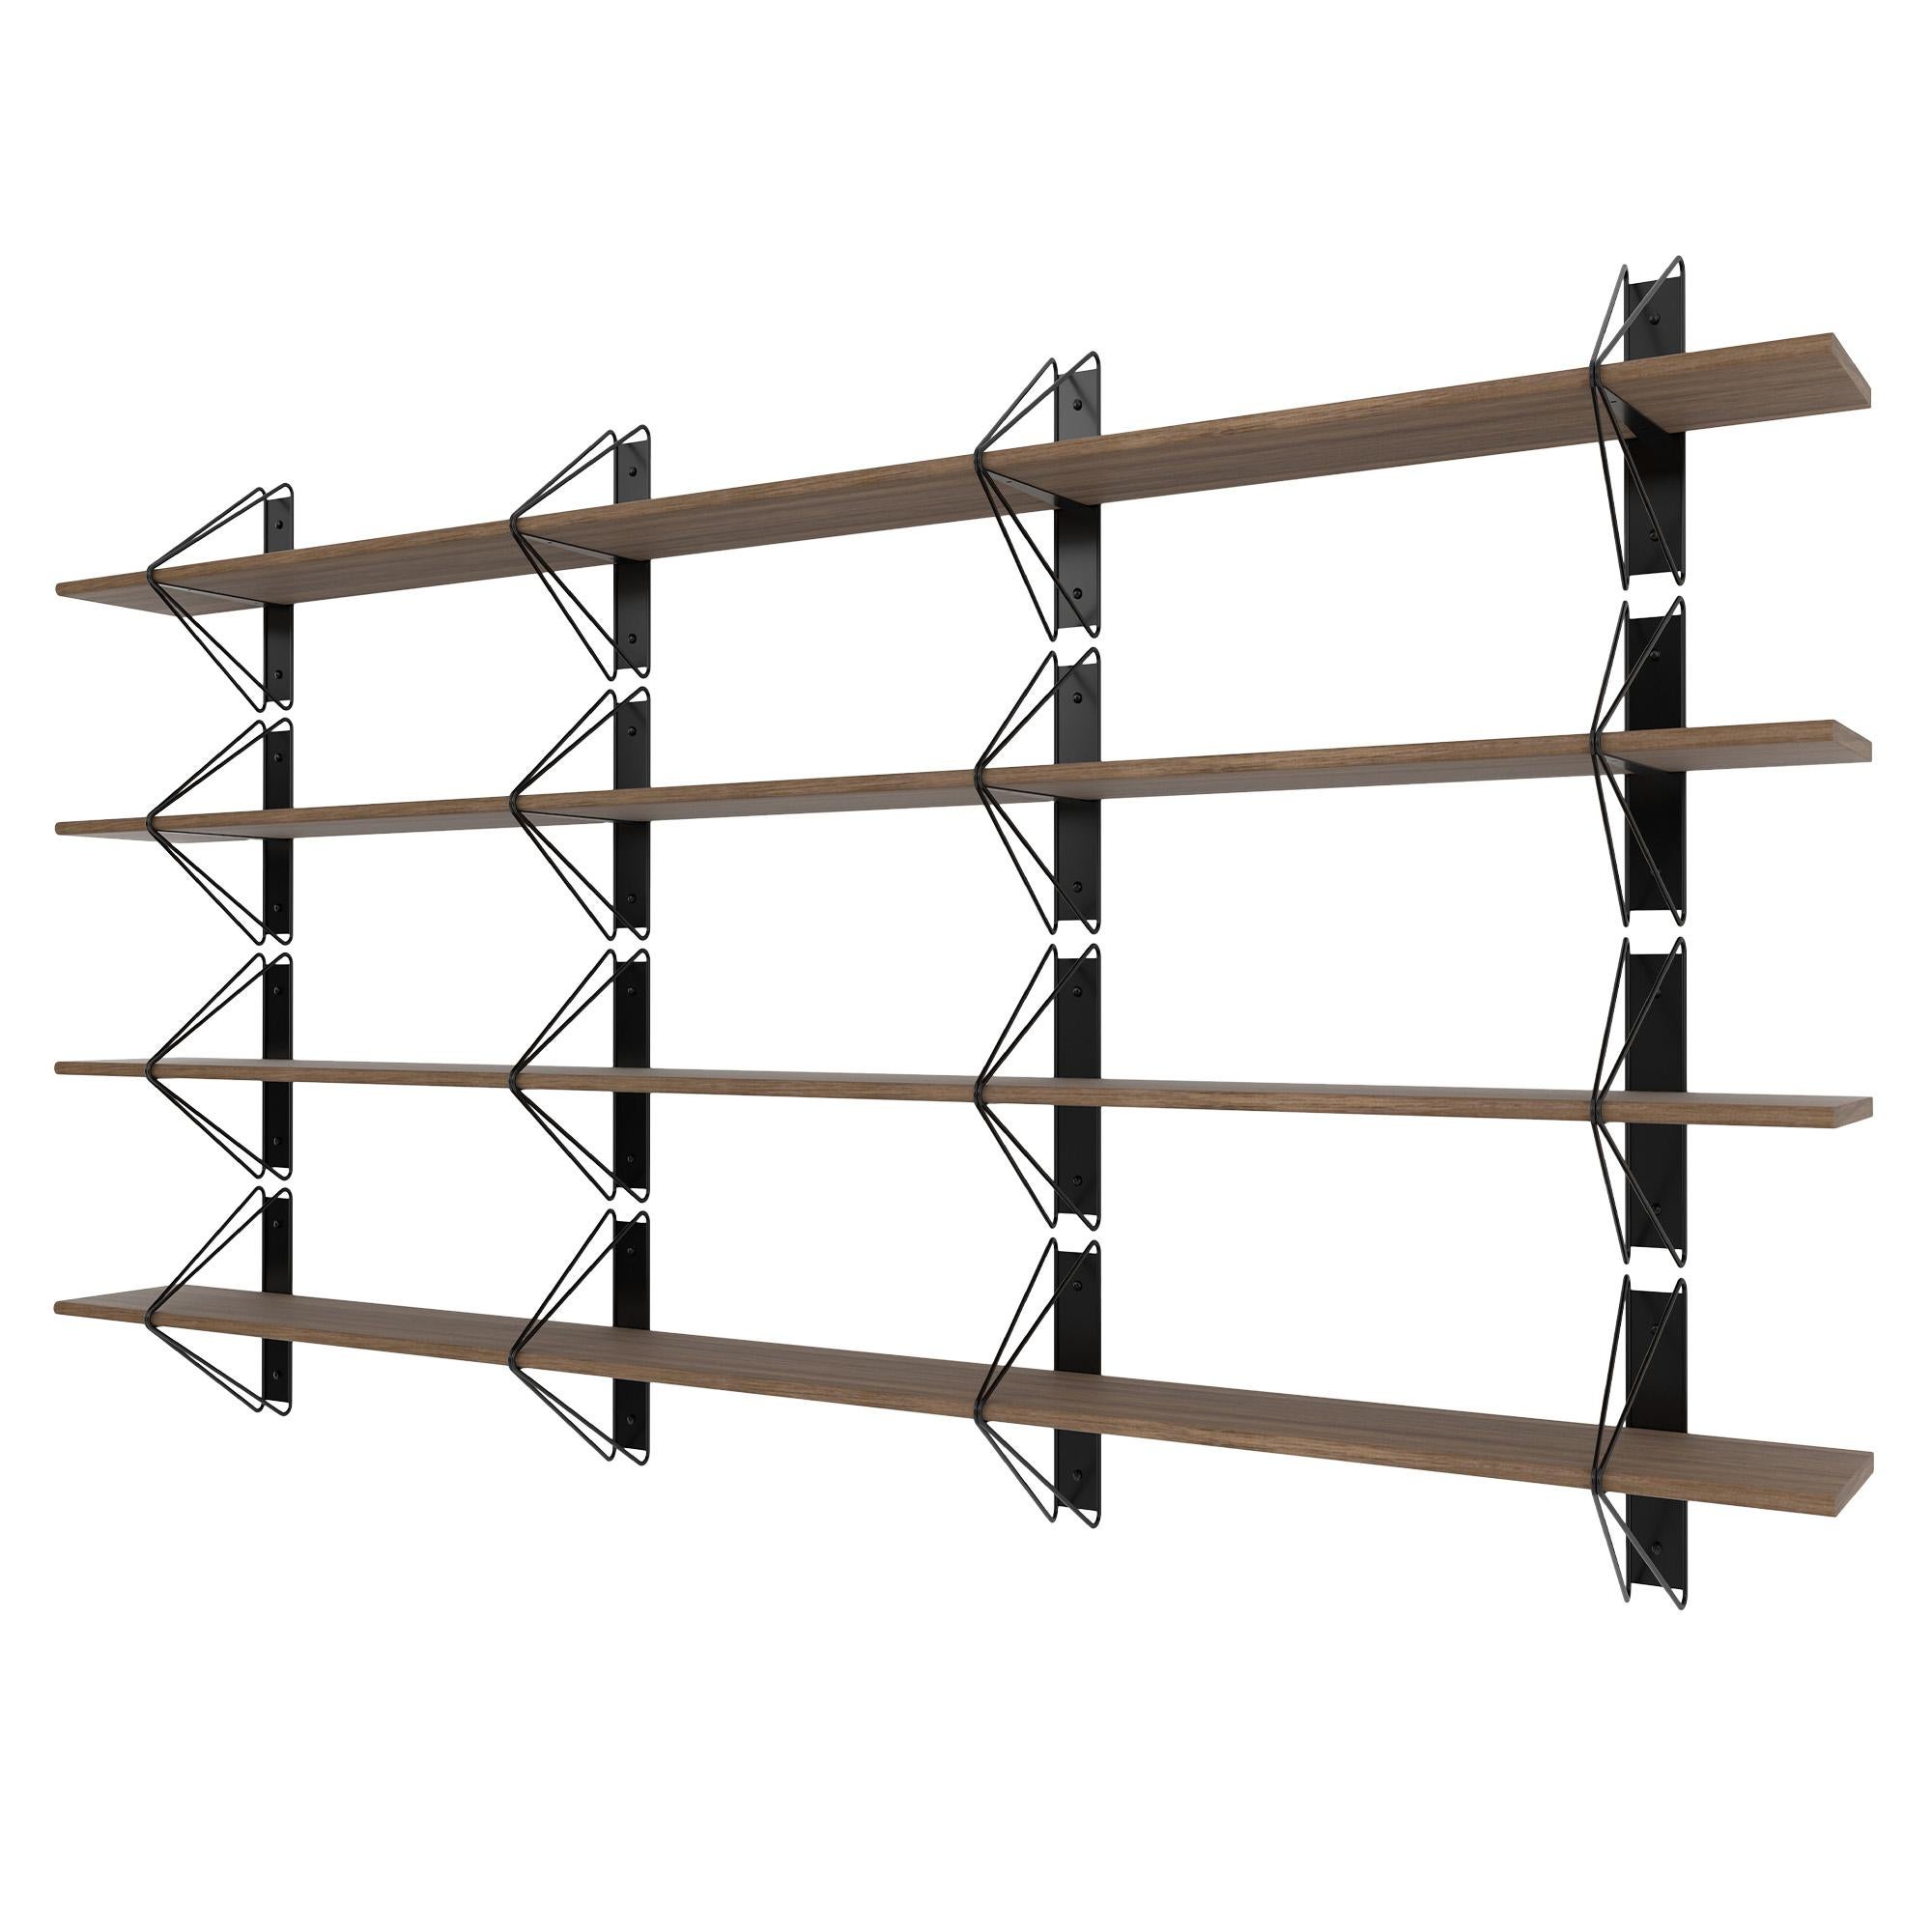 Set of 4 Strut Shelves from Souda, Black and Walnut, Made to Order For Sale